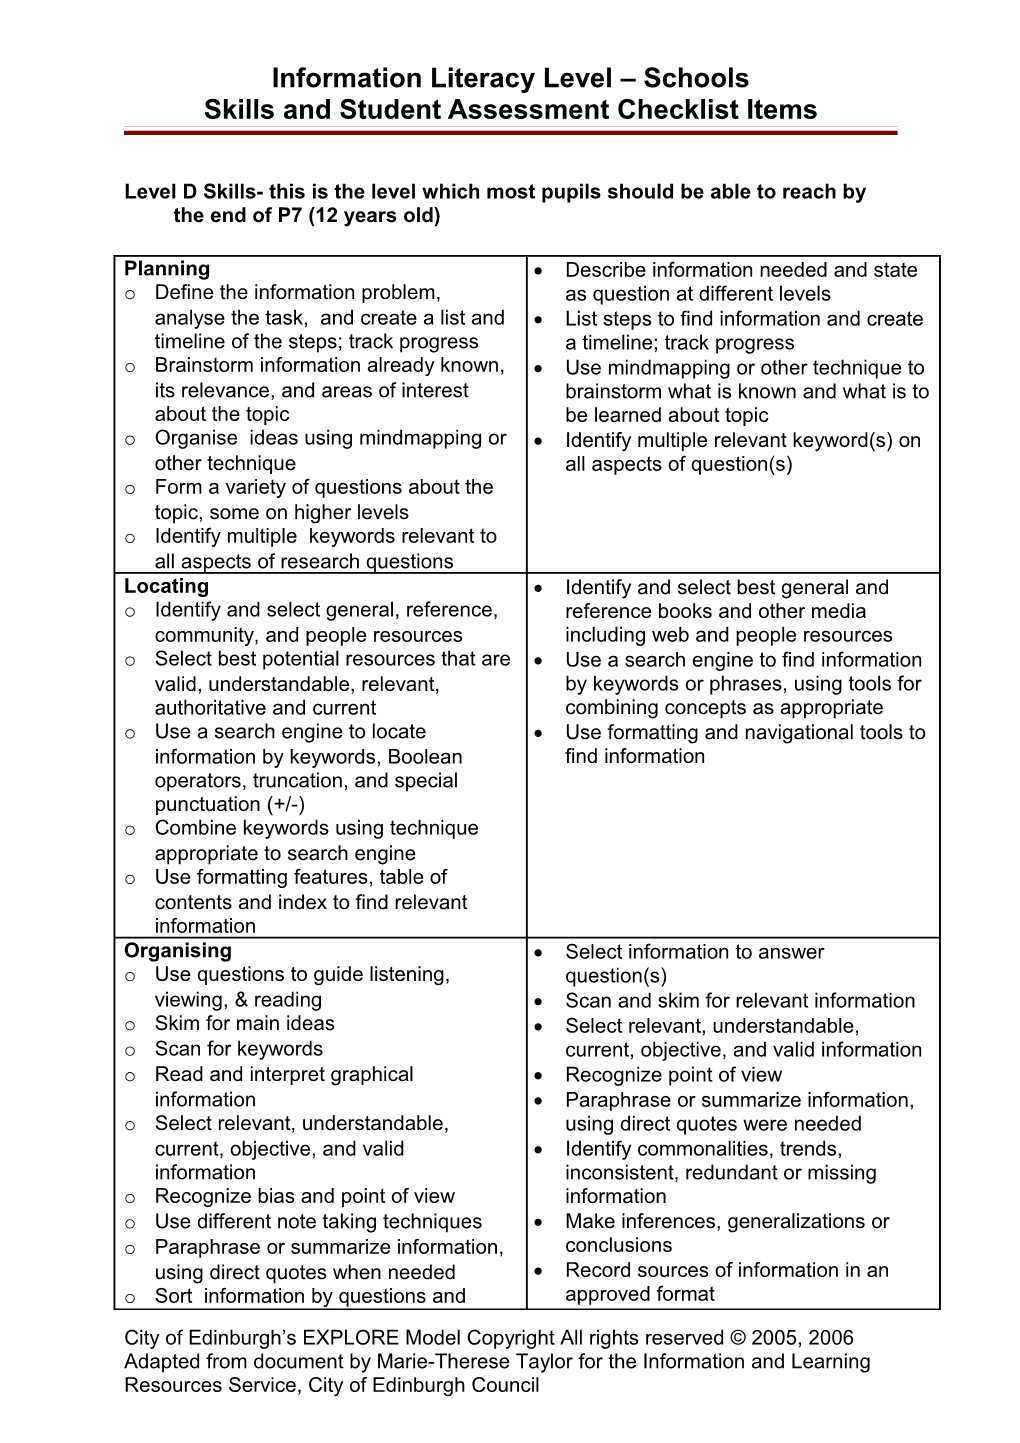 Information Literacy Level Schools Skills and Student Assessment Checklist Items